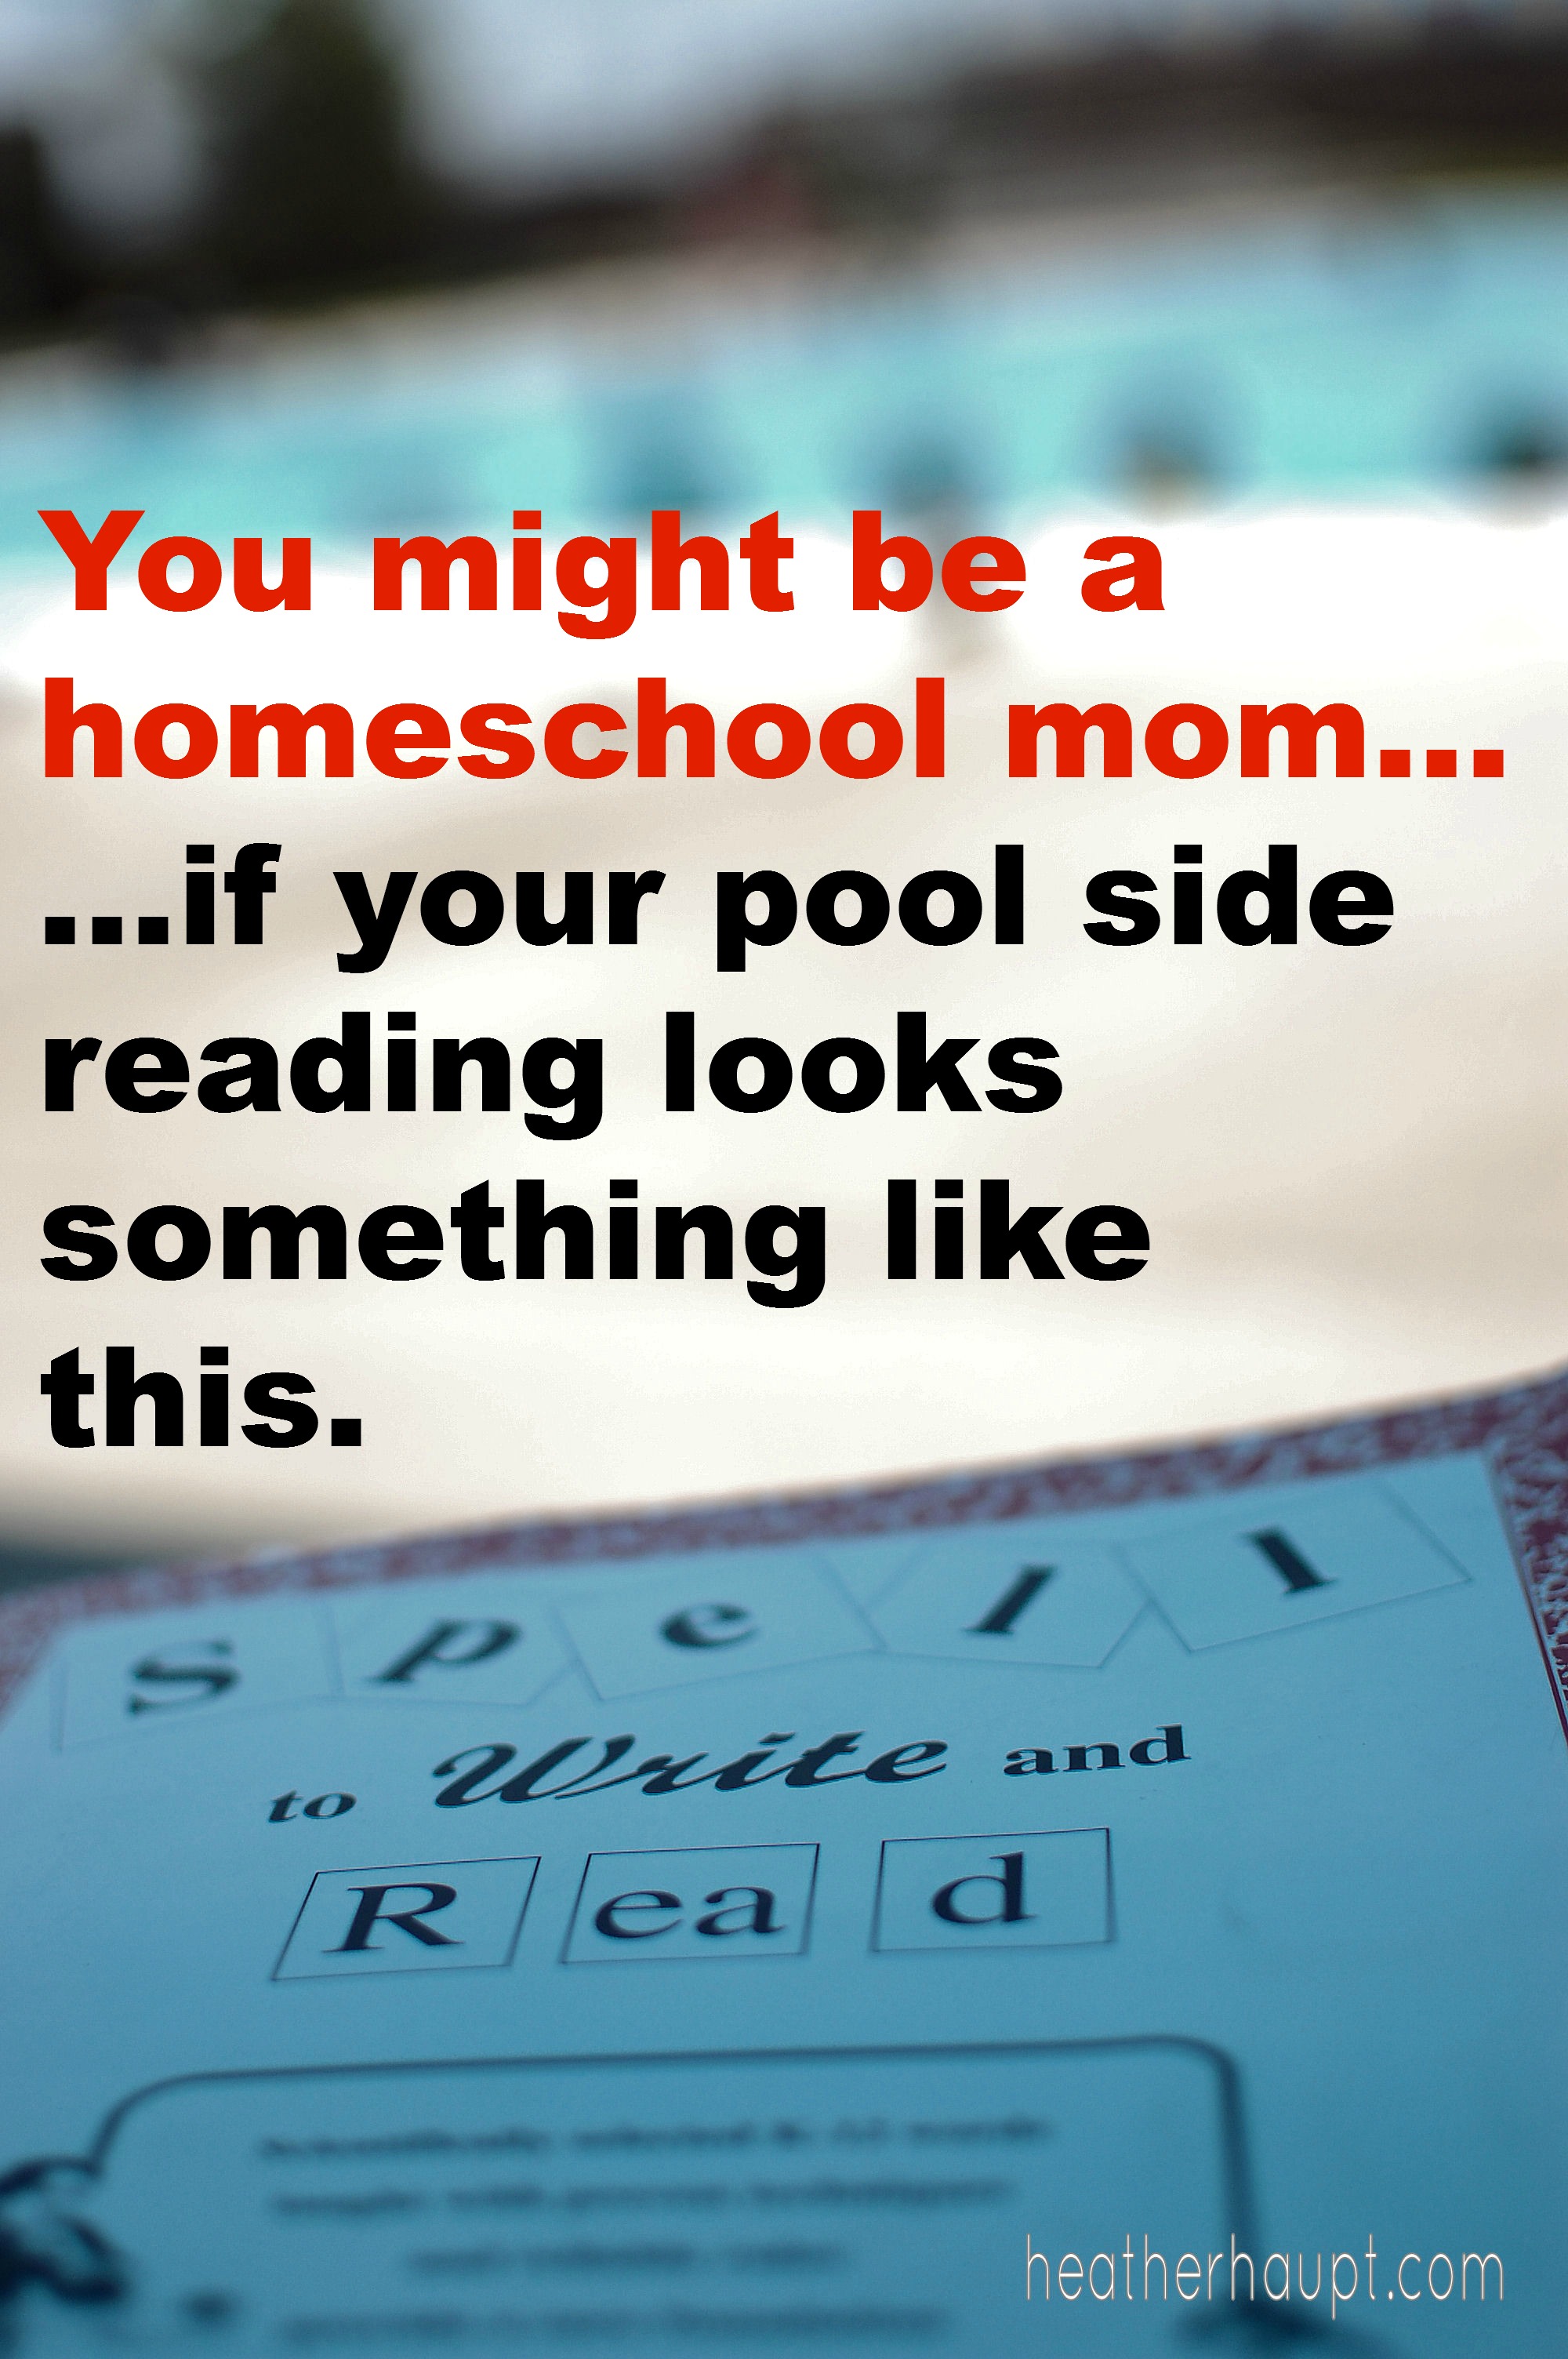 You might be a homeschool mom if...